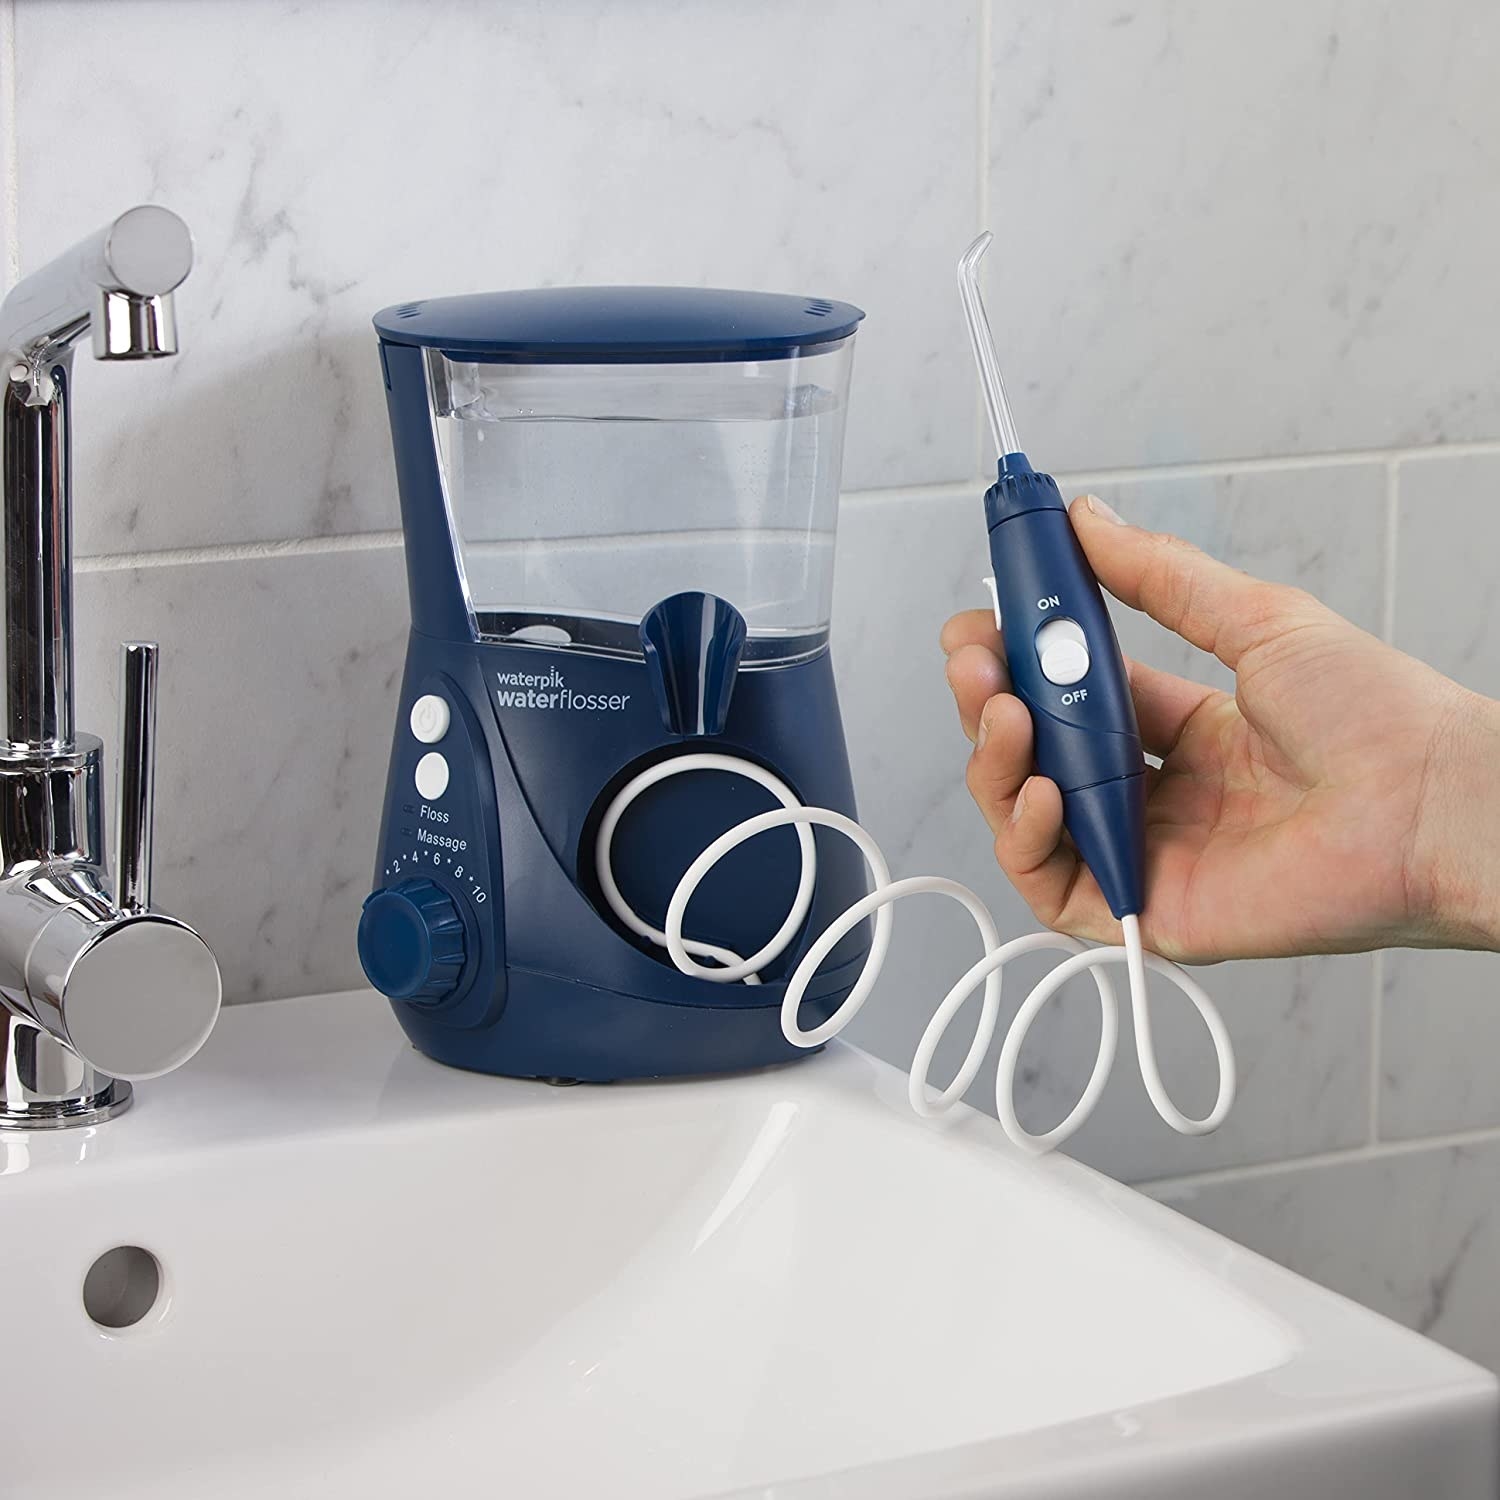 A person holding the waterpik in their hand